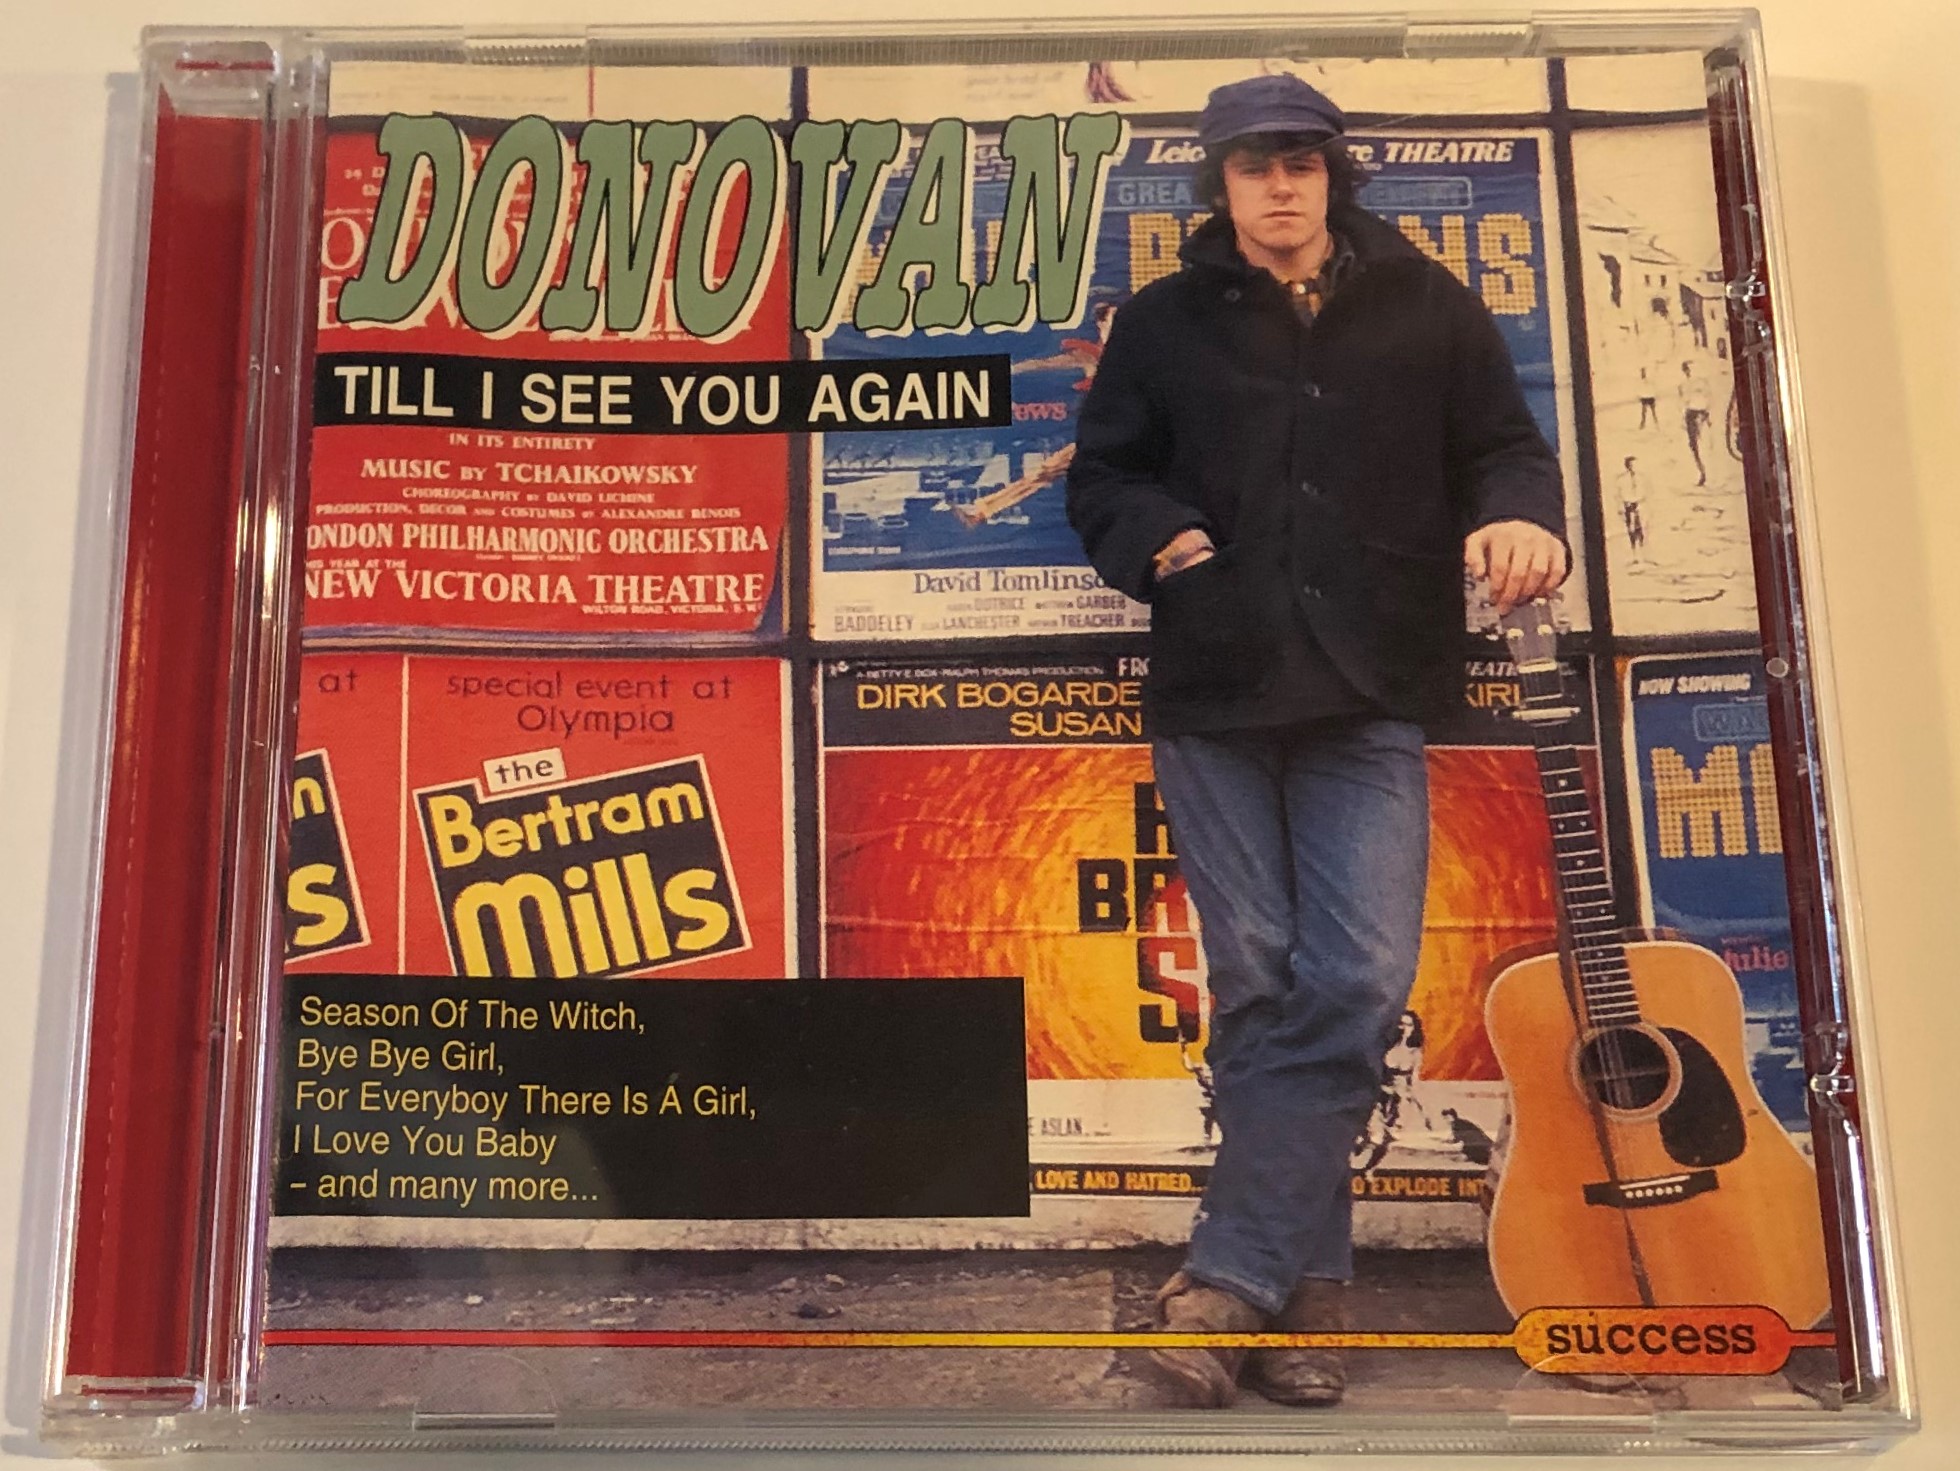 donovan-till-i-see-you-again-season-of-the-witch-bye-bye-girl-for-every-boy-there-is-a-girl-i-love-you-baby-and-many-more...-elap-music-audio-cd-1993-50171252-1-.jpg